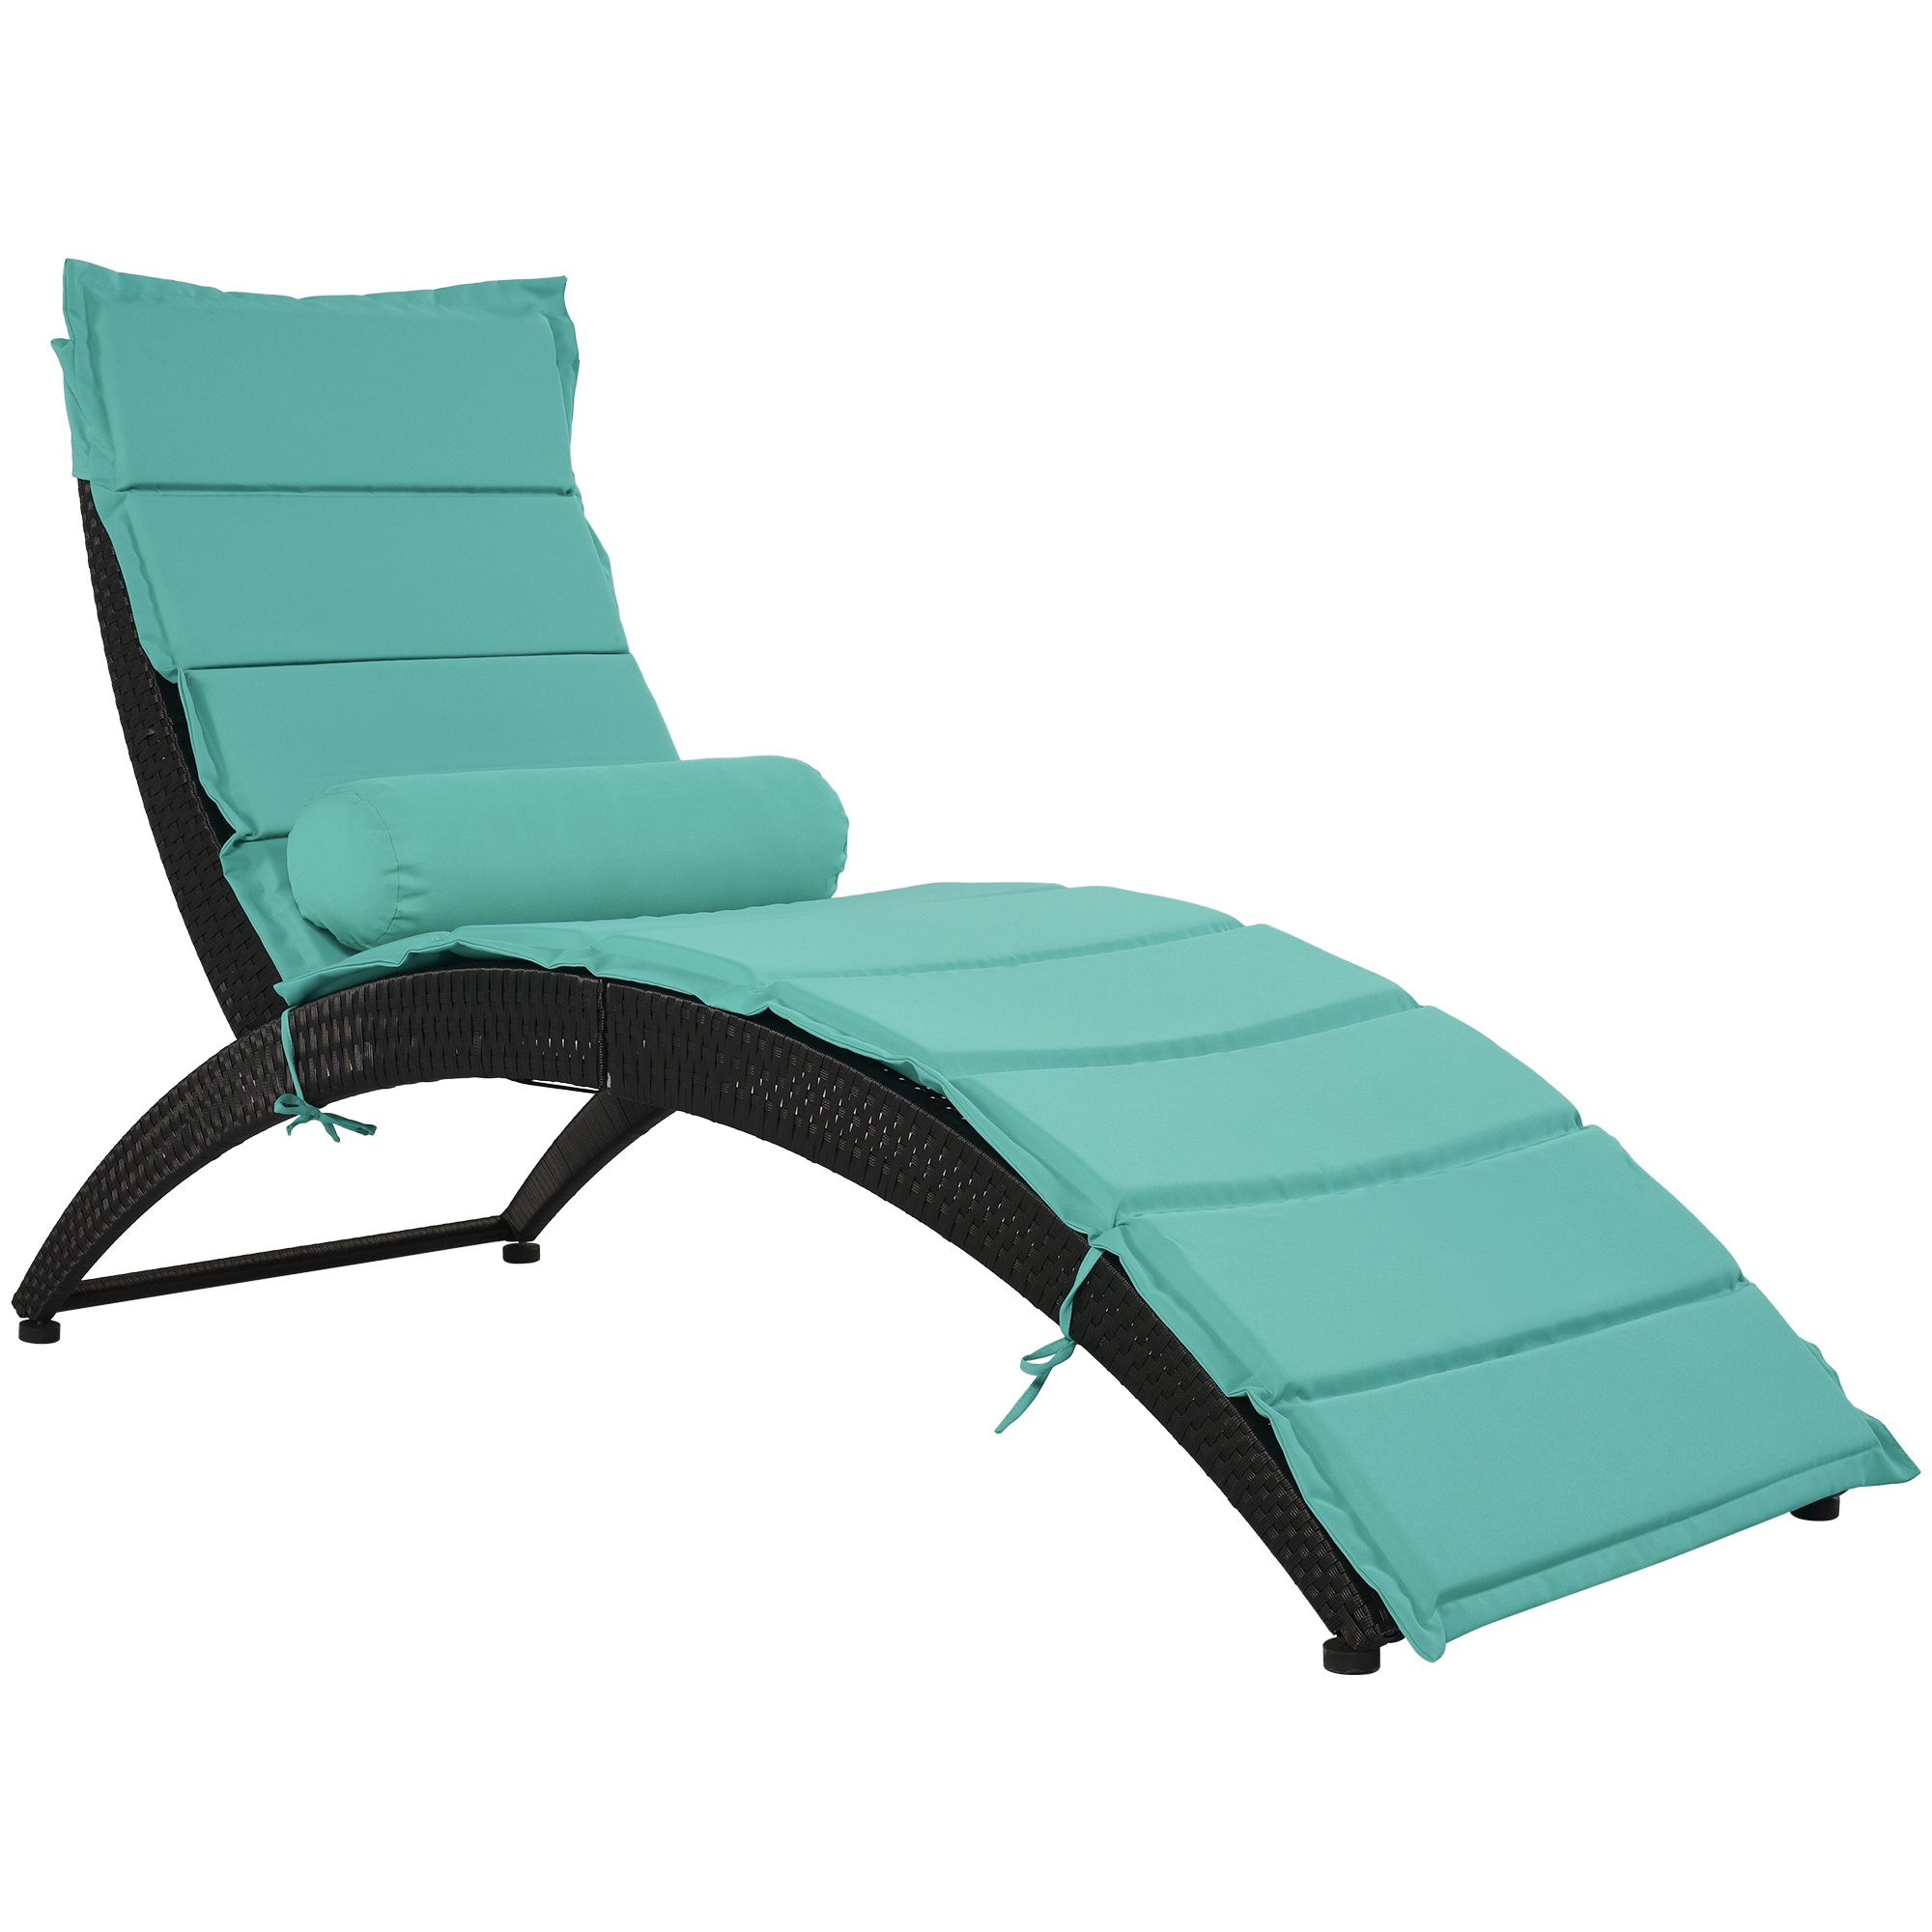 Lounge Chair Outdoor, Foldable Outdoor Chaise Lounge, Patio Wicker Sun Lounger with Removable Cushion and Bolster Pillow for Poolside Deck Porch Garden, 1 Set, Blue - image 3 of 12